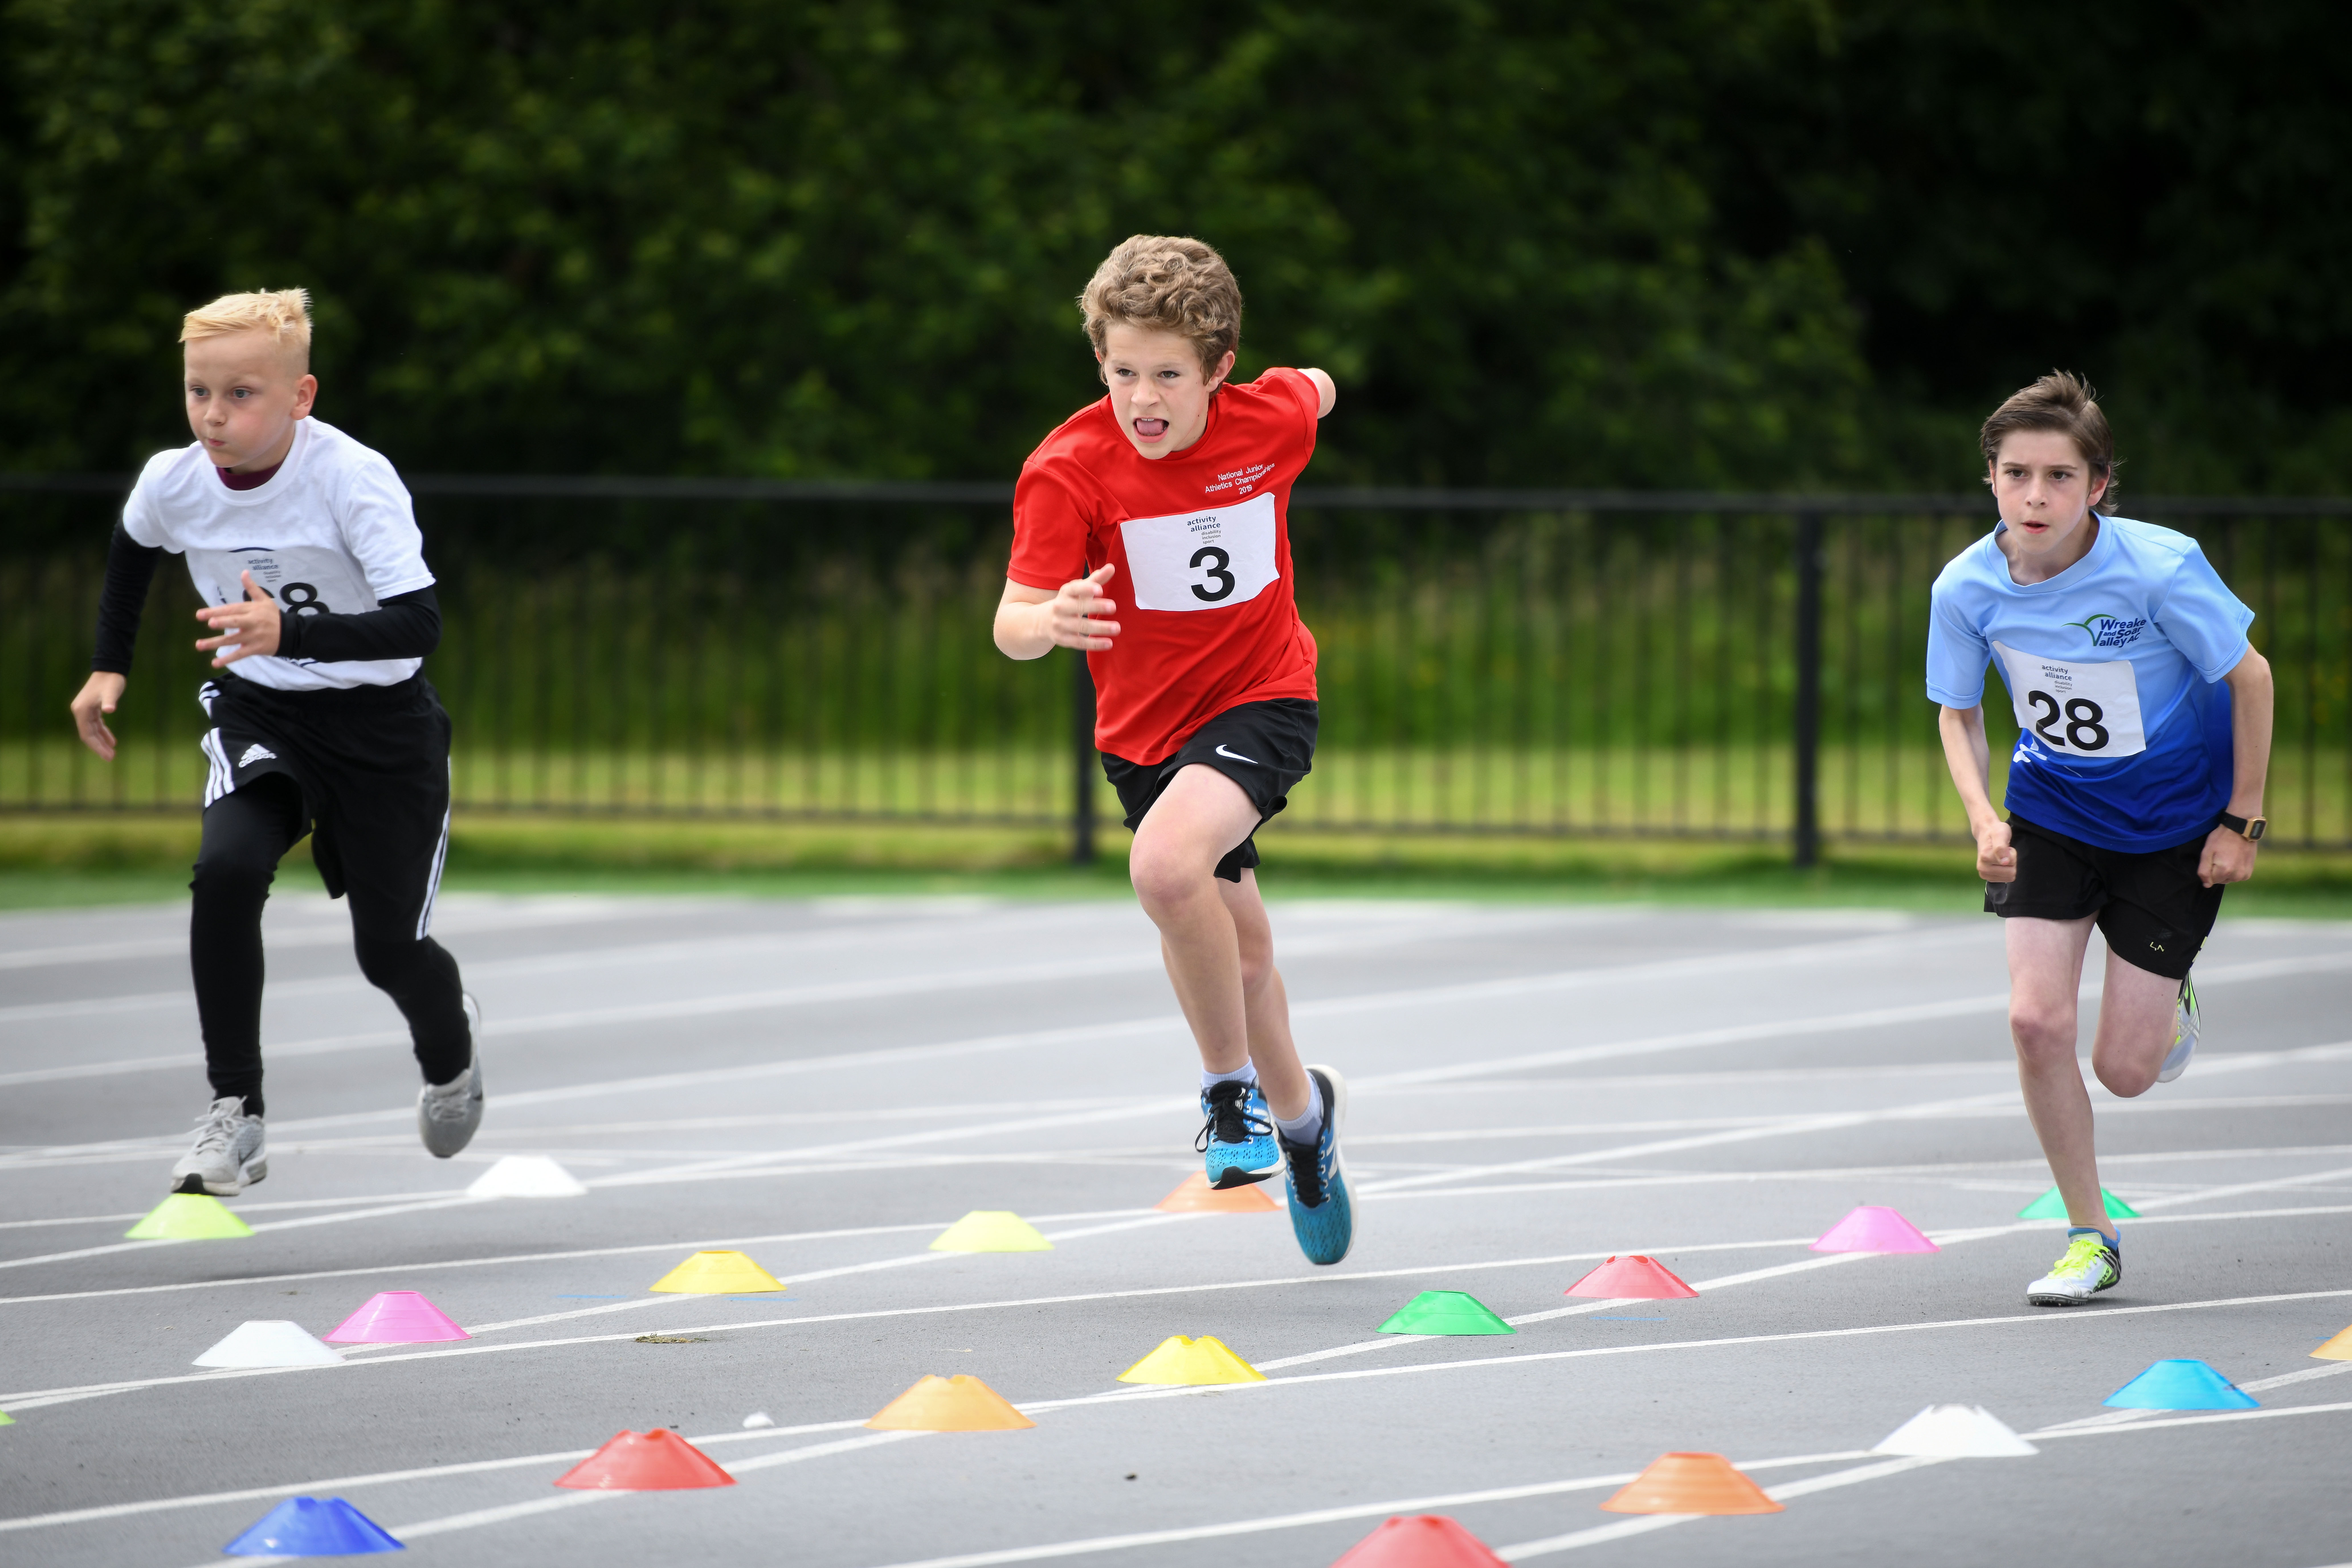 Activity Alliance: Results for the National Junior Athletics